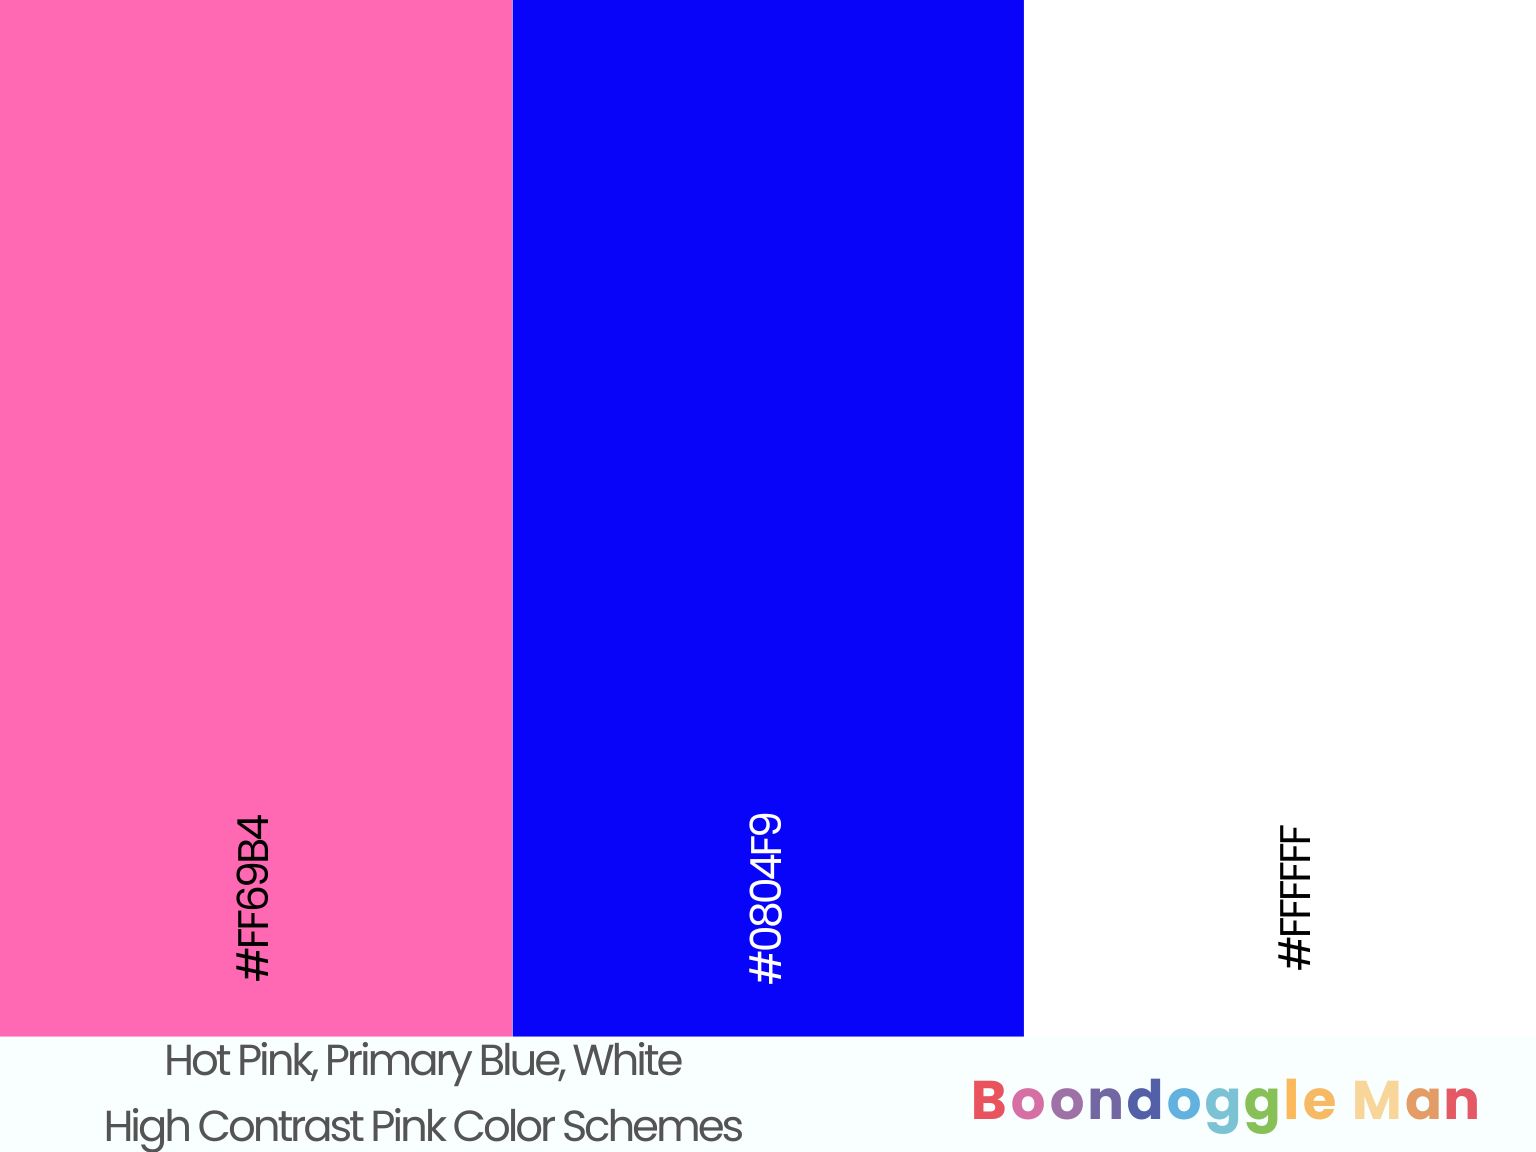 Hot Pink, Primary Blue, White